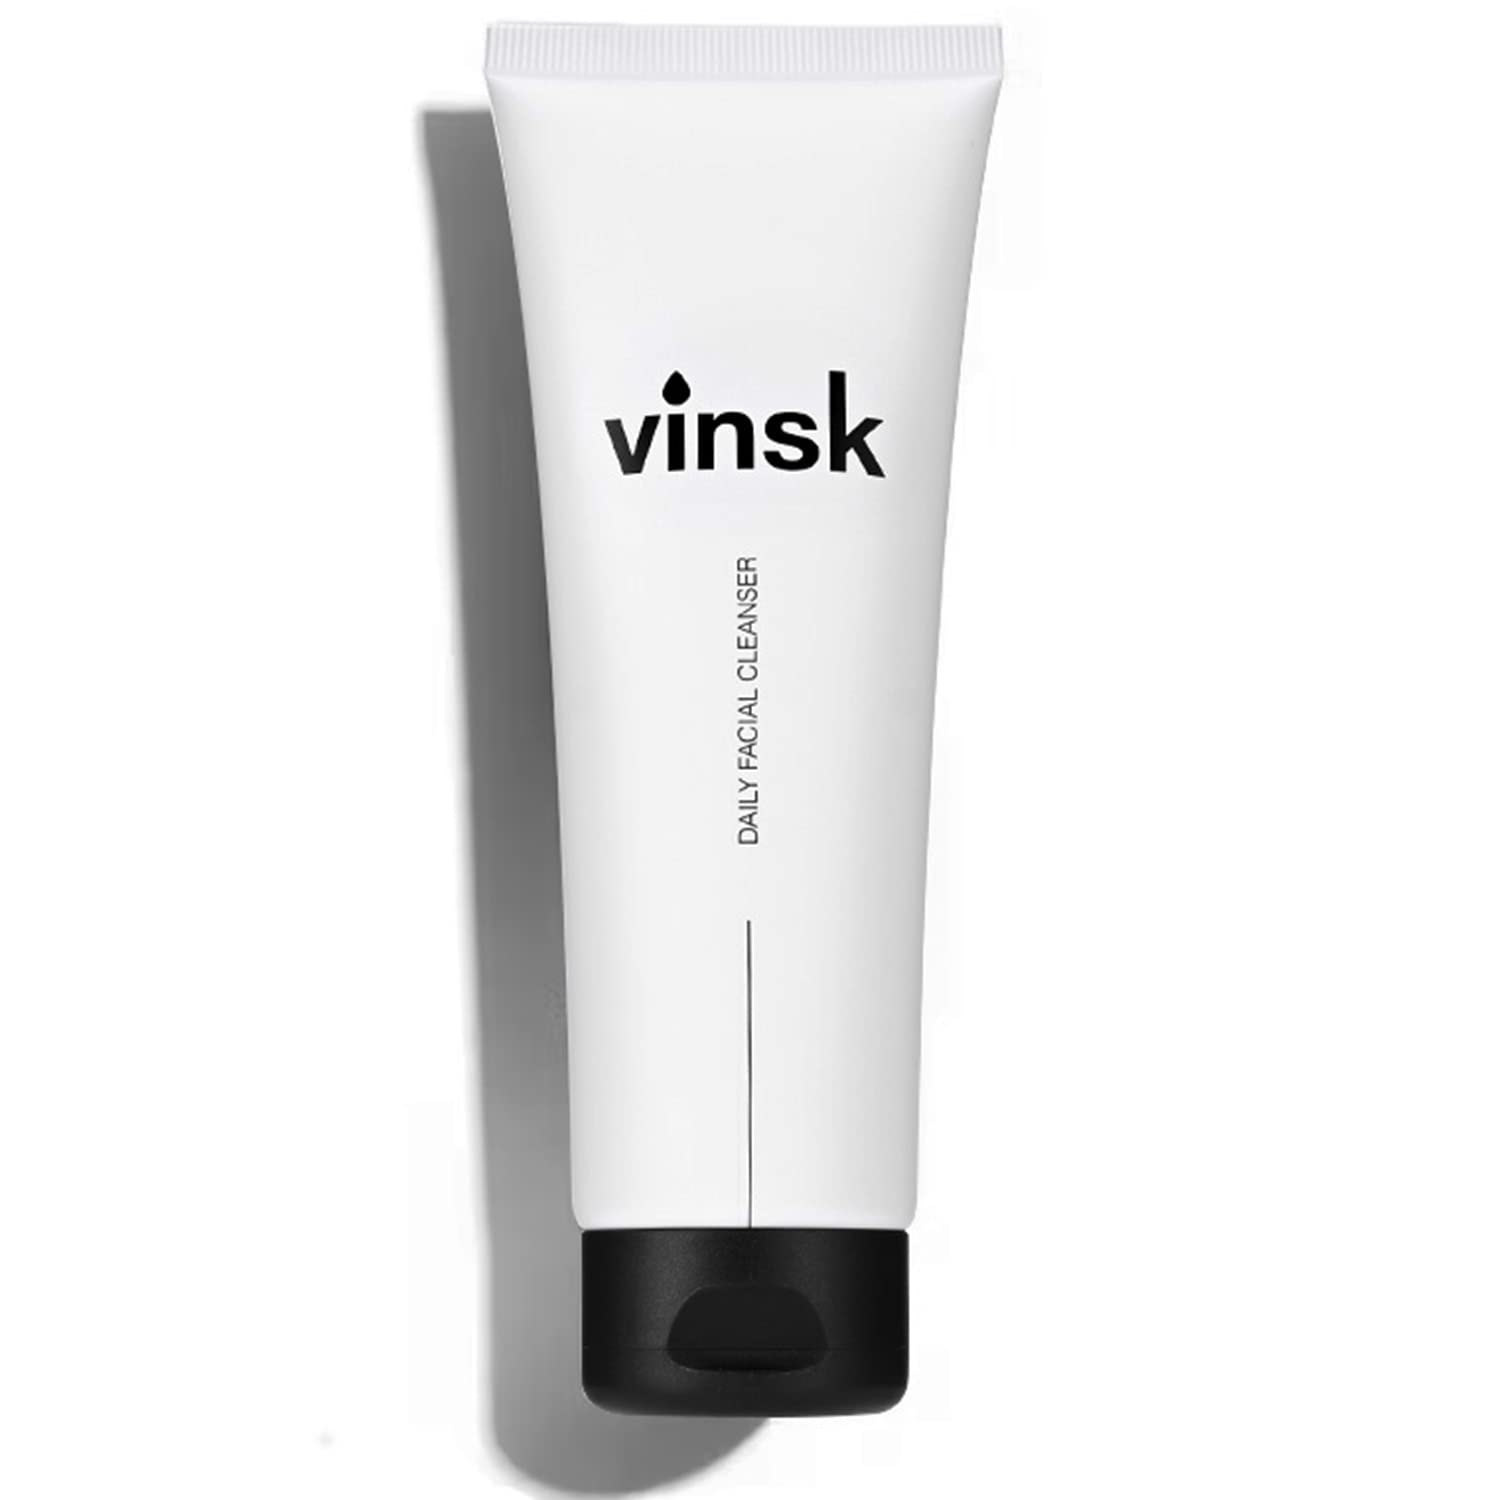 vinsk Vinsk® Daily Facial Cleanser | Daily Facial Cleansing Against Impurities, Pimples & Acne | Face Wash Gel Cleansing Gel With Hydro Boost | Facial Cleanser Now